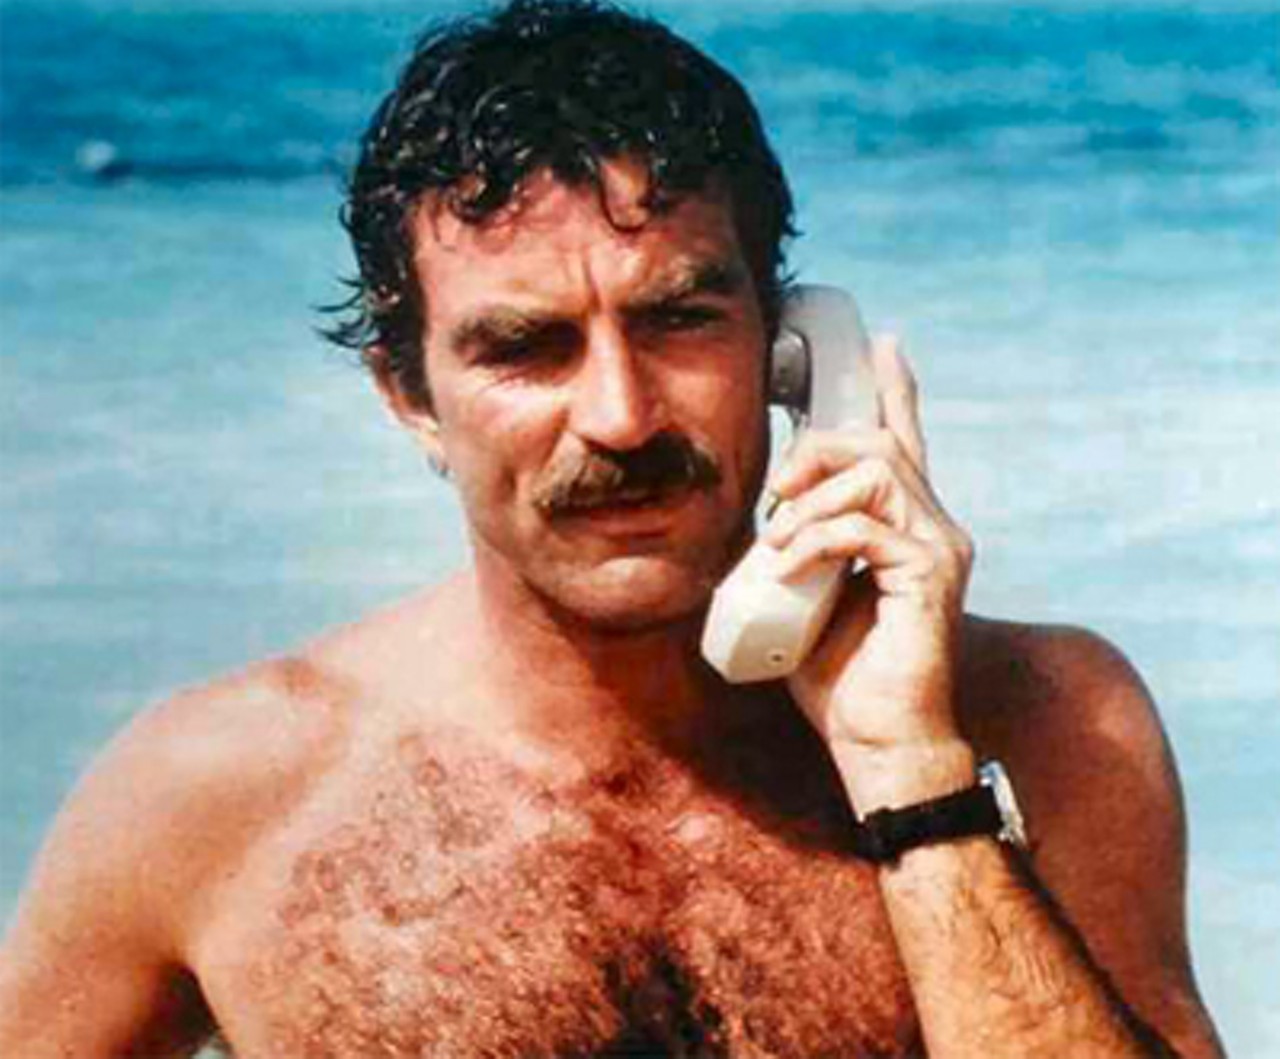 Tom Selleck and his mustache talk on a phone. On the beach. This clearly isn't a cell phone either. Weird.